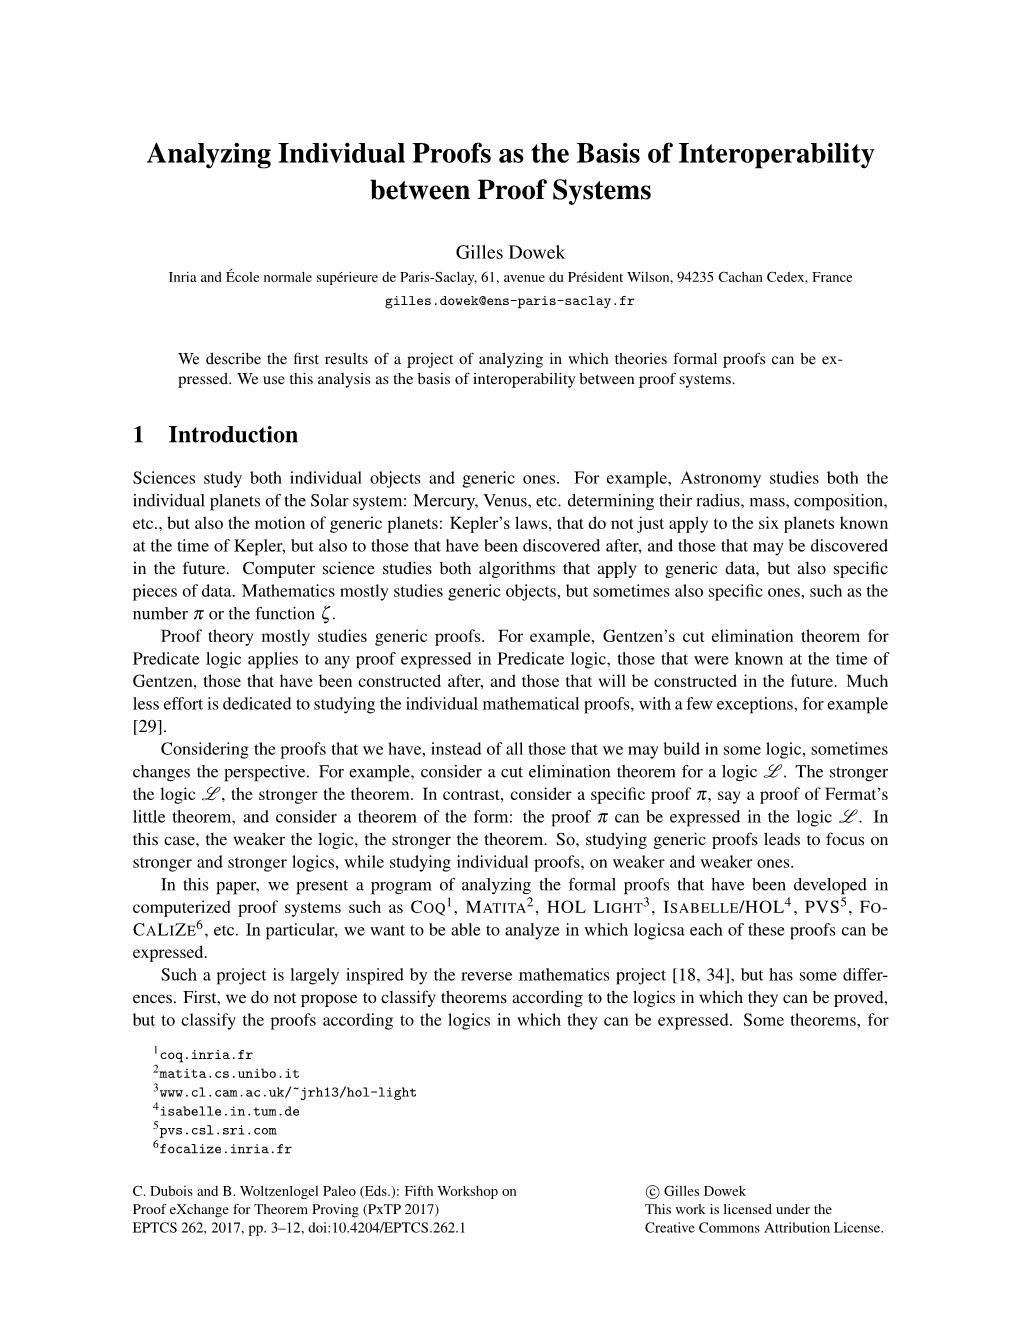 Analyzing Individual Proofs As the Basis of Interoperability Between Proof Systems